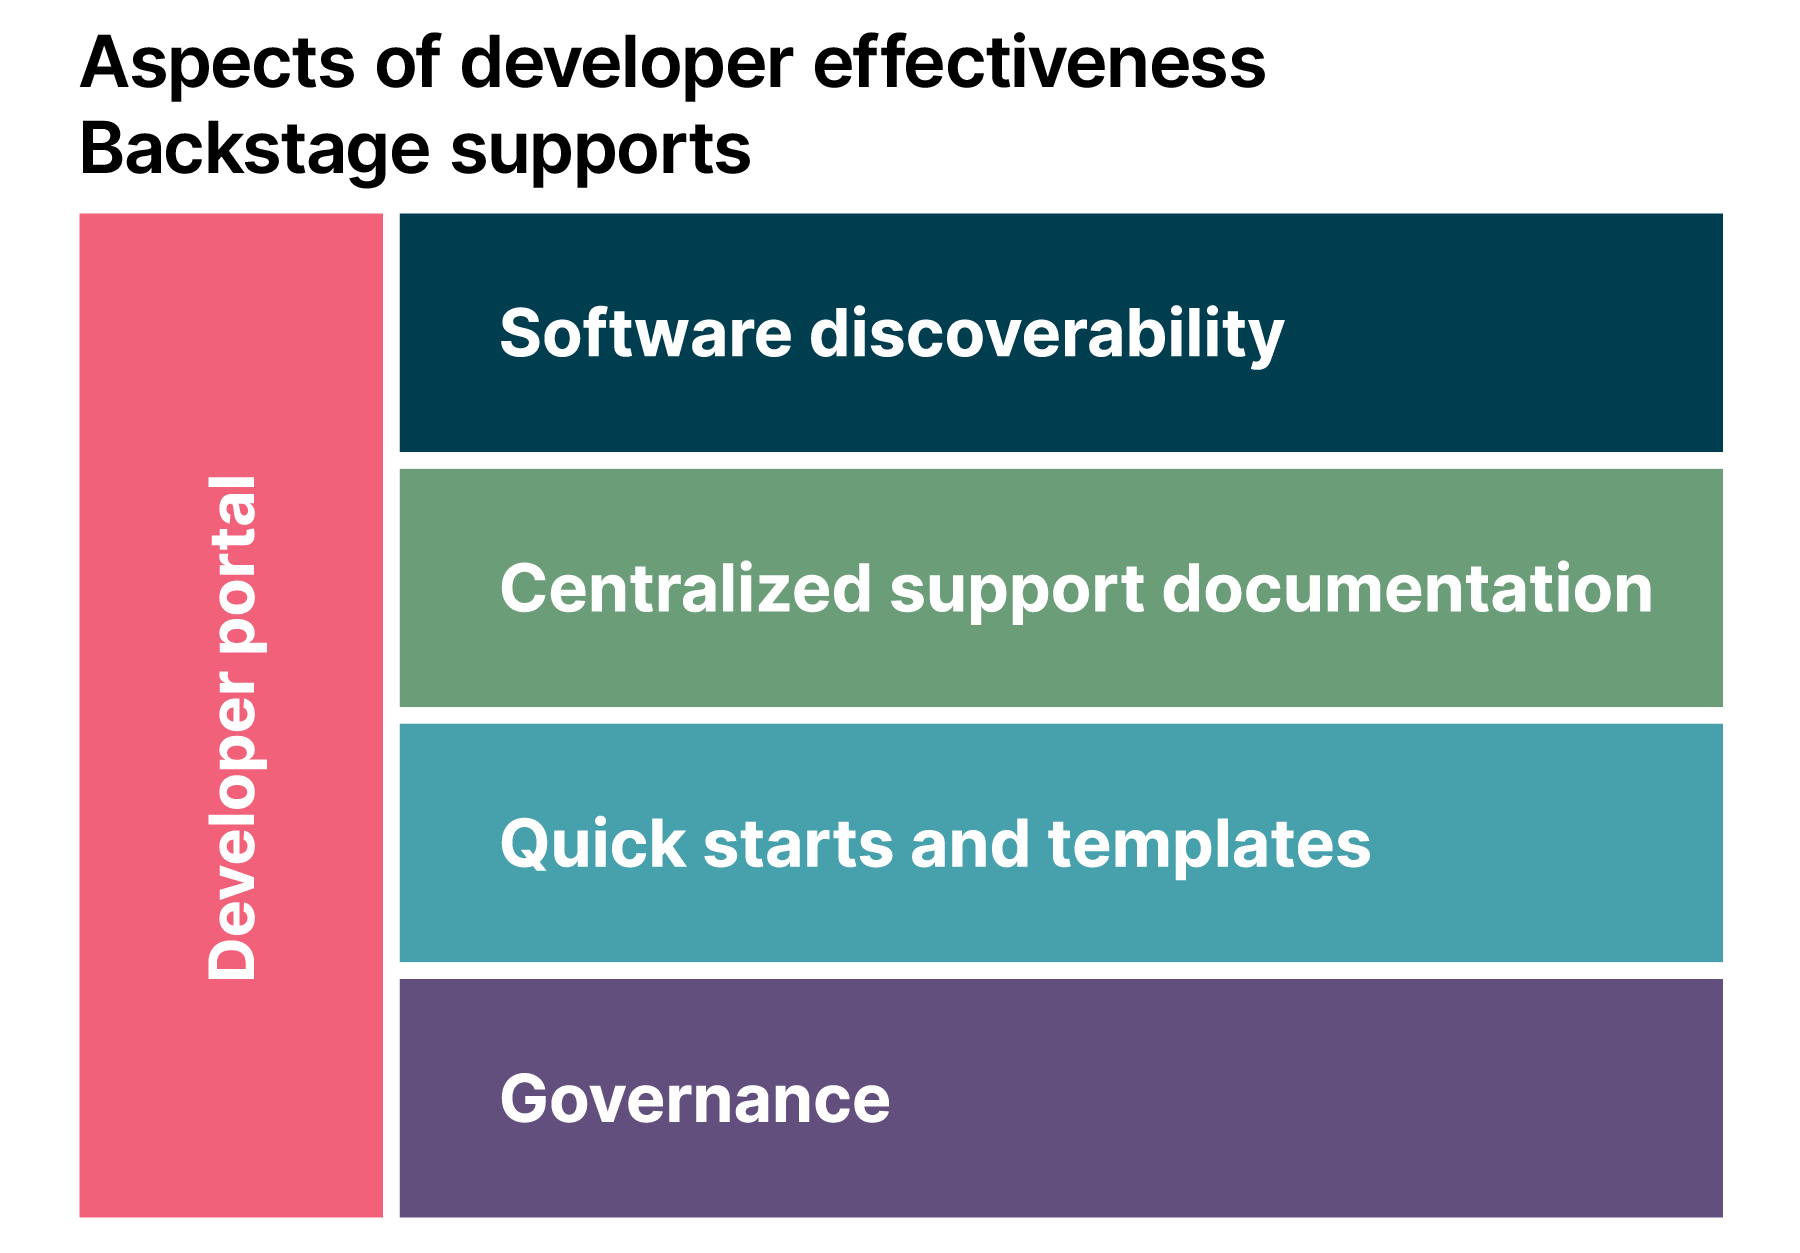 Components of developer effectiveness that Backstage helps with such as software discoverability, support documentation in one location, quick start templates, and governance